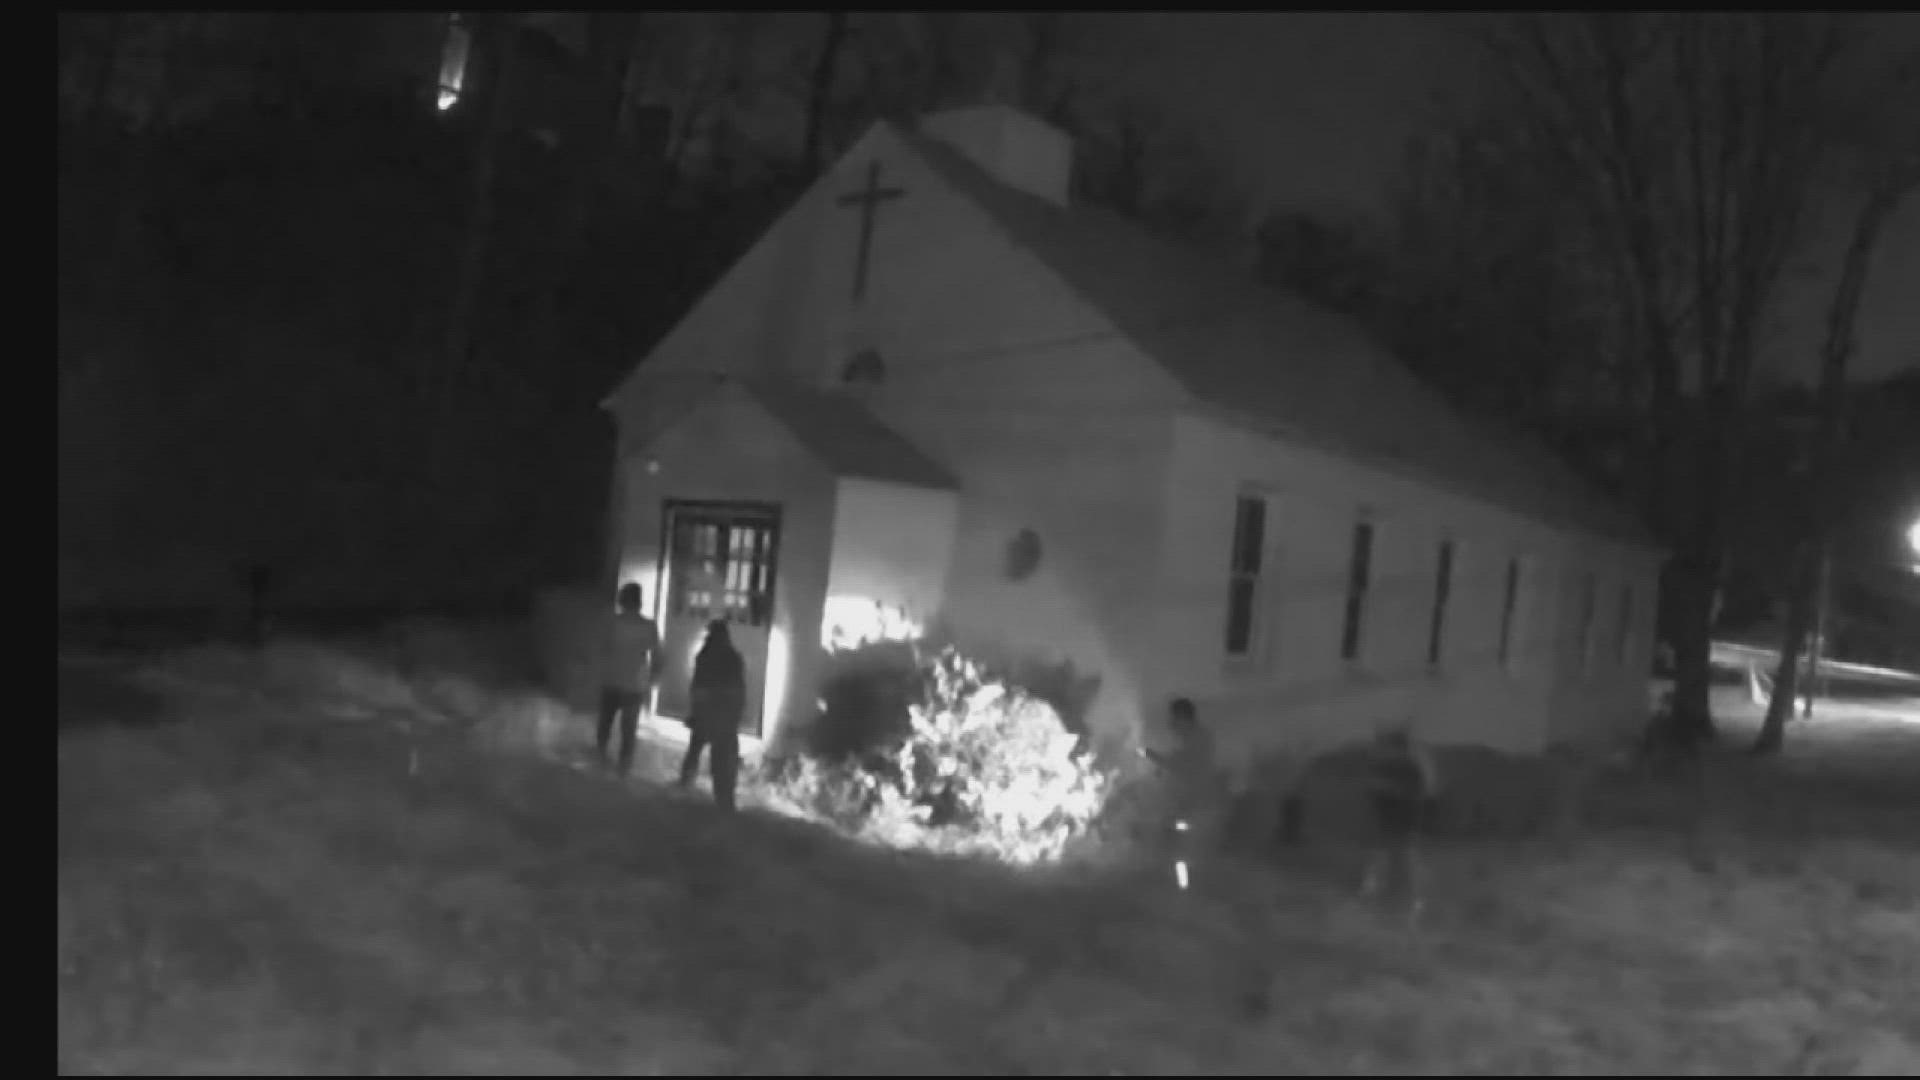 Surveillance video captured suspects forcing their way into a historical Potomac, Maryland church and vandalizing property.